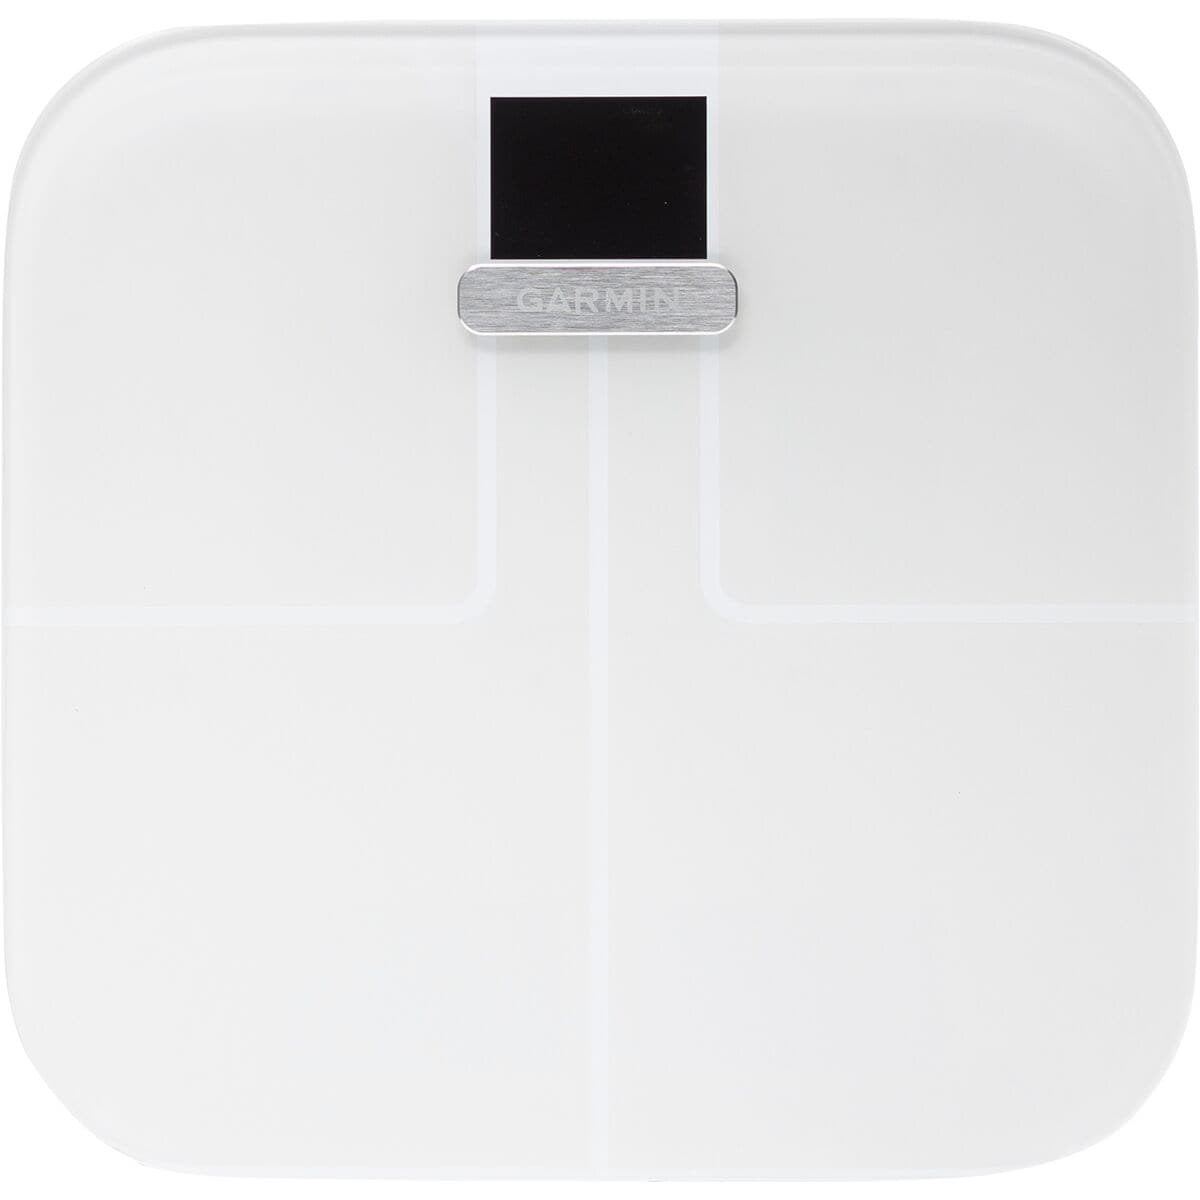 Garmin Index S2, Smart Scale with Wireless Connectivity, Measure Body Fat,  Muscle, Bone Mass, Body Water and More-Black (Bundle) 